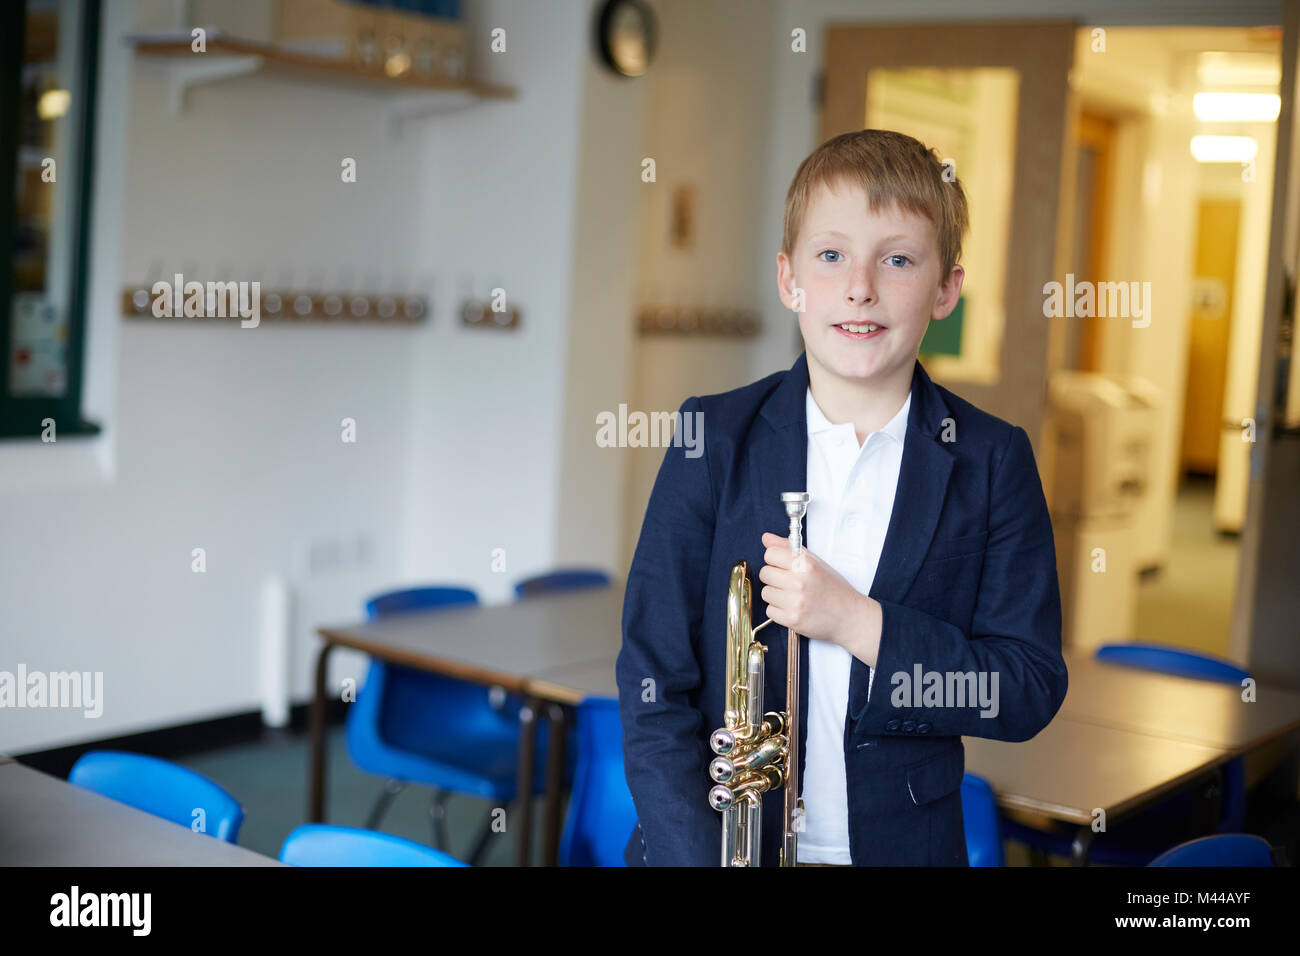 Primary schoolboy holding trumpet in classroom, portrait Stock Photo